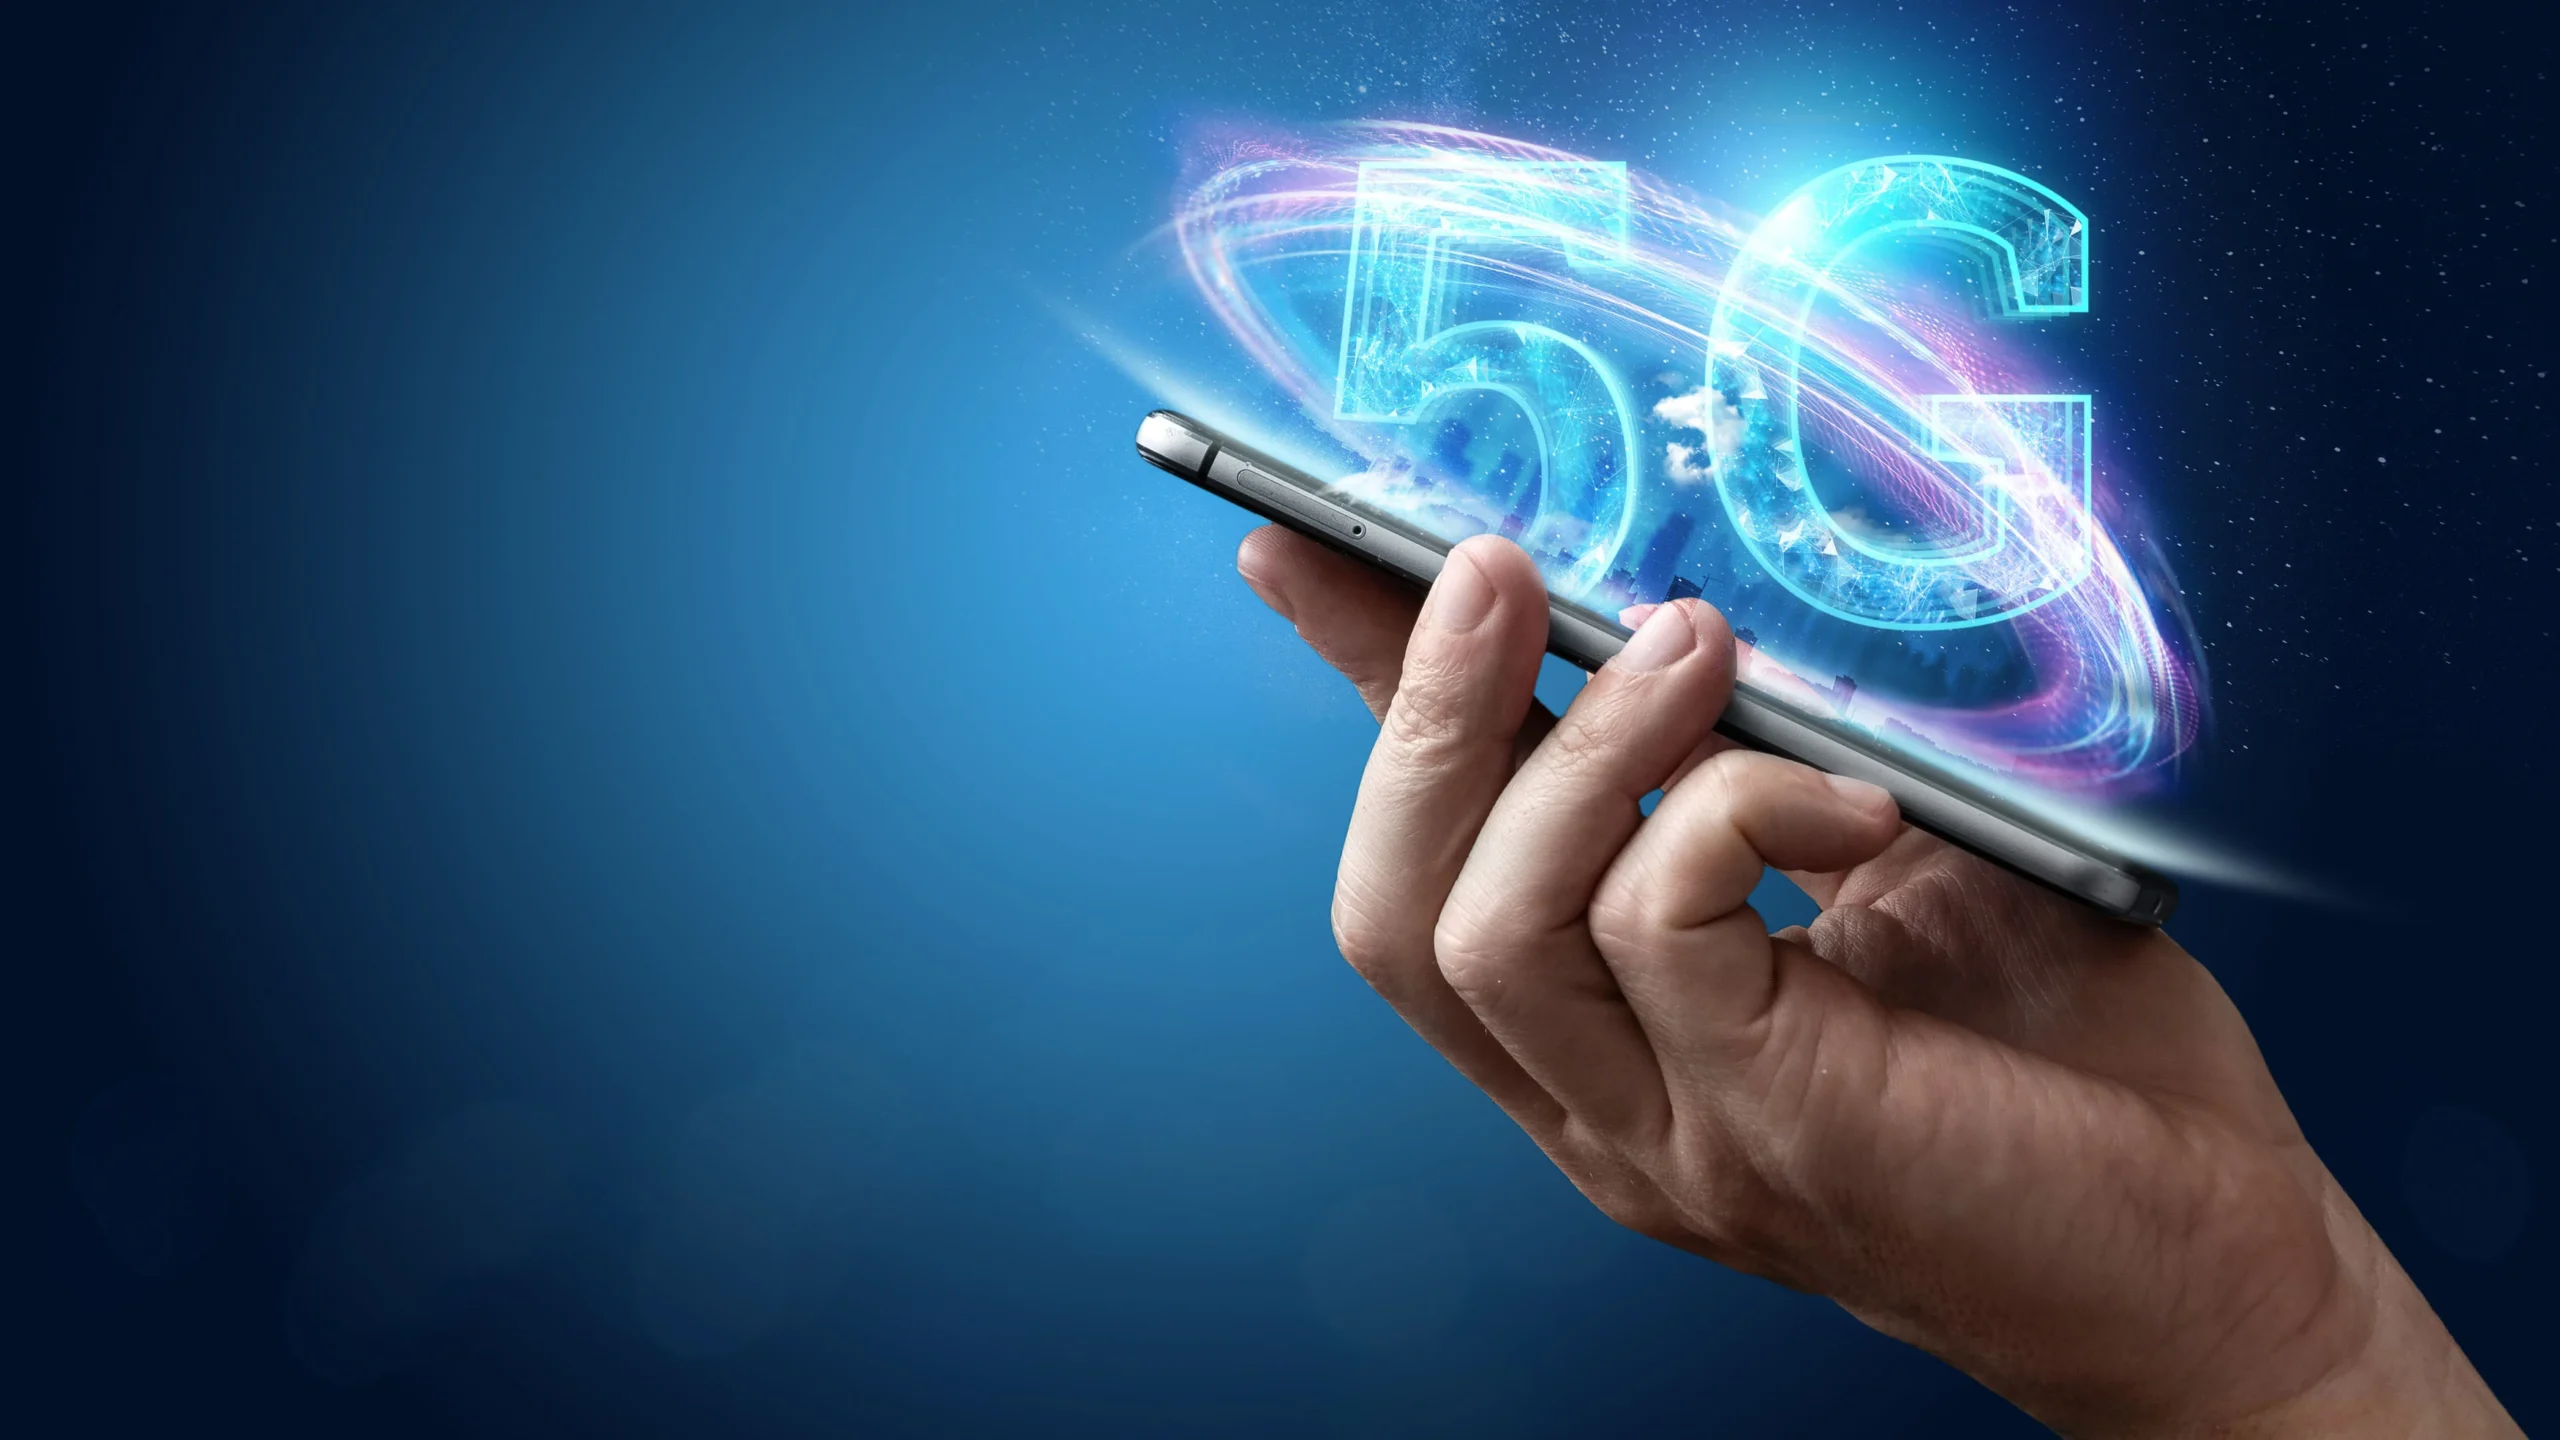 5G technology: the future of networking speeds